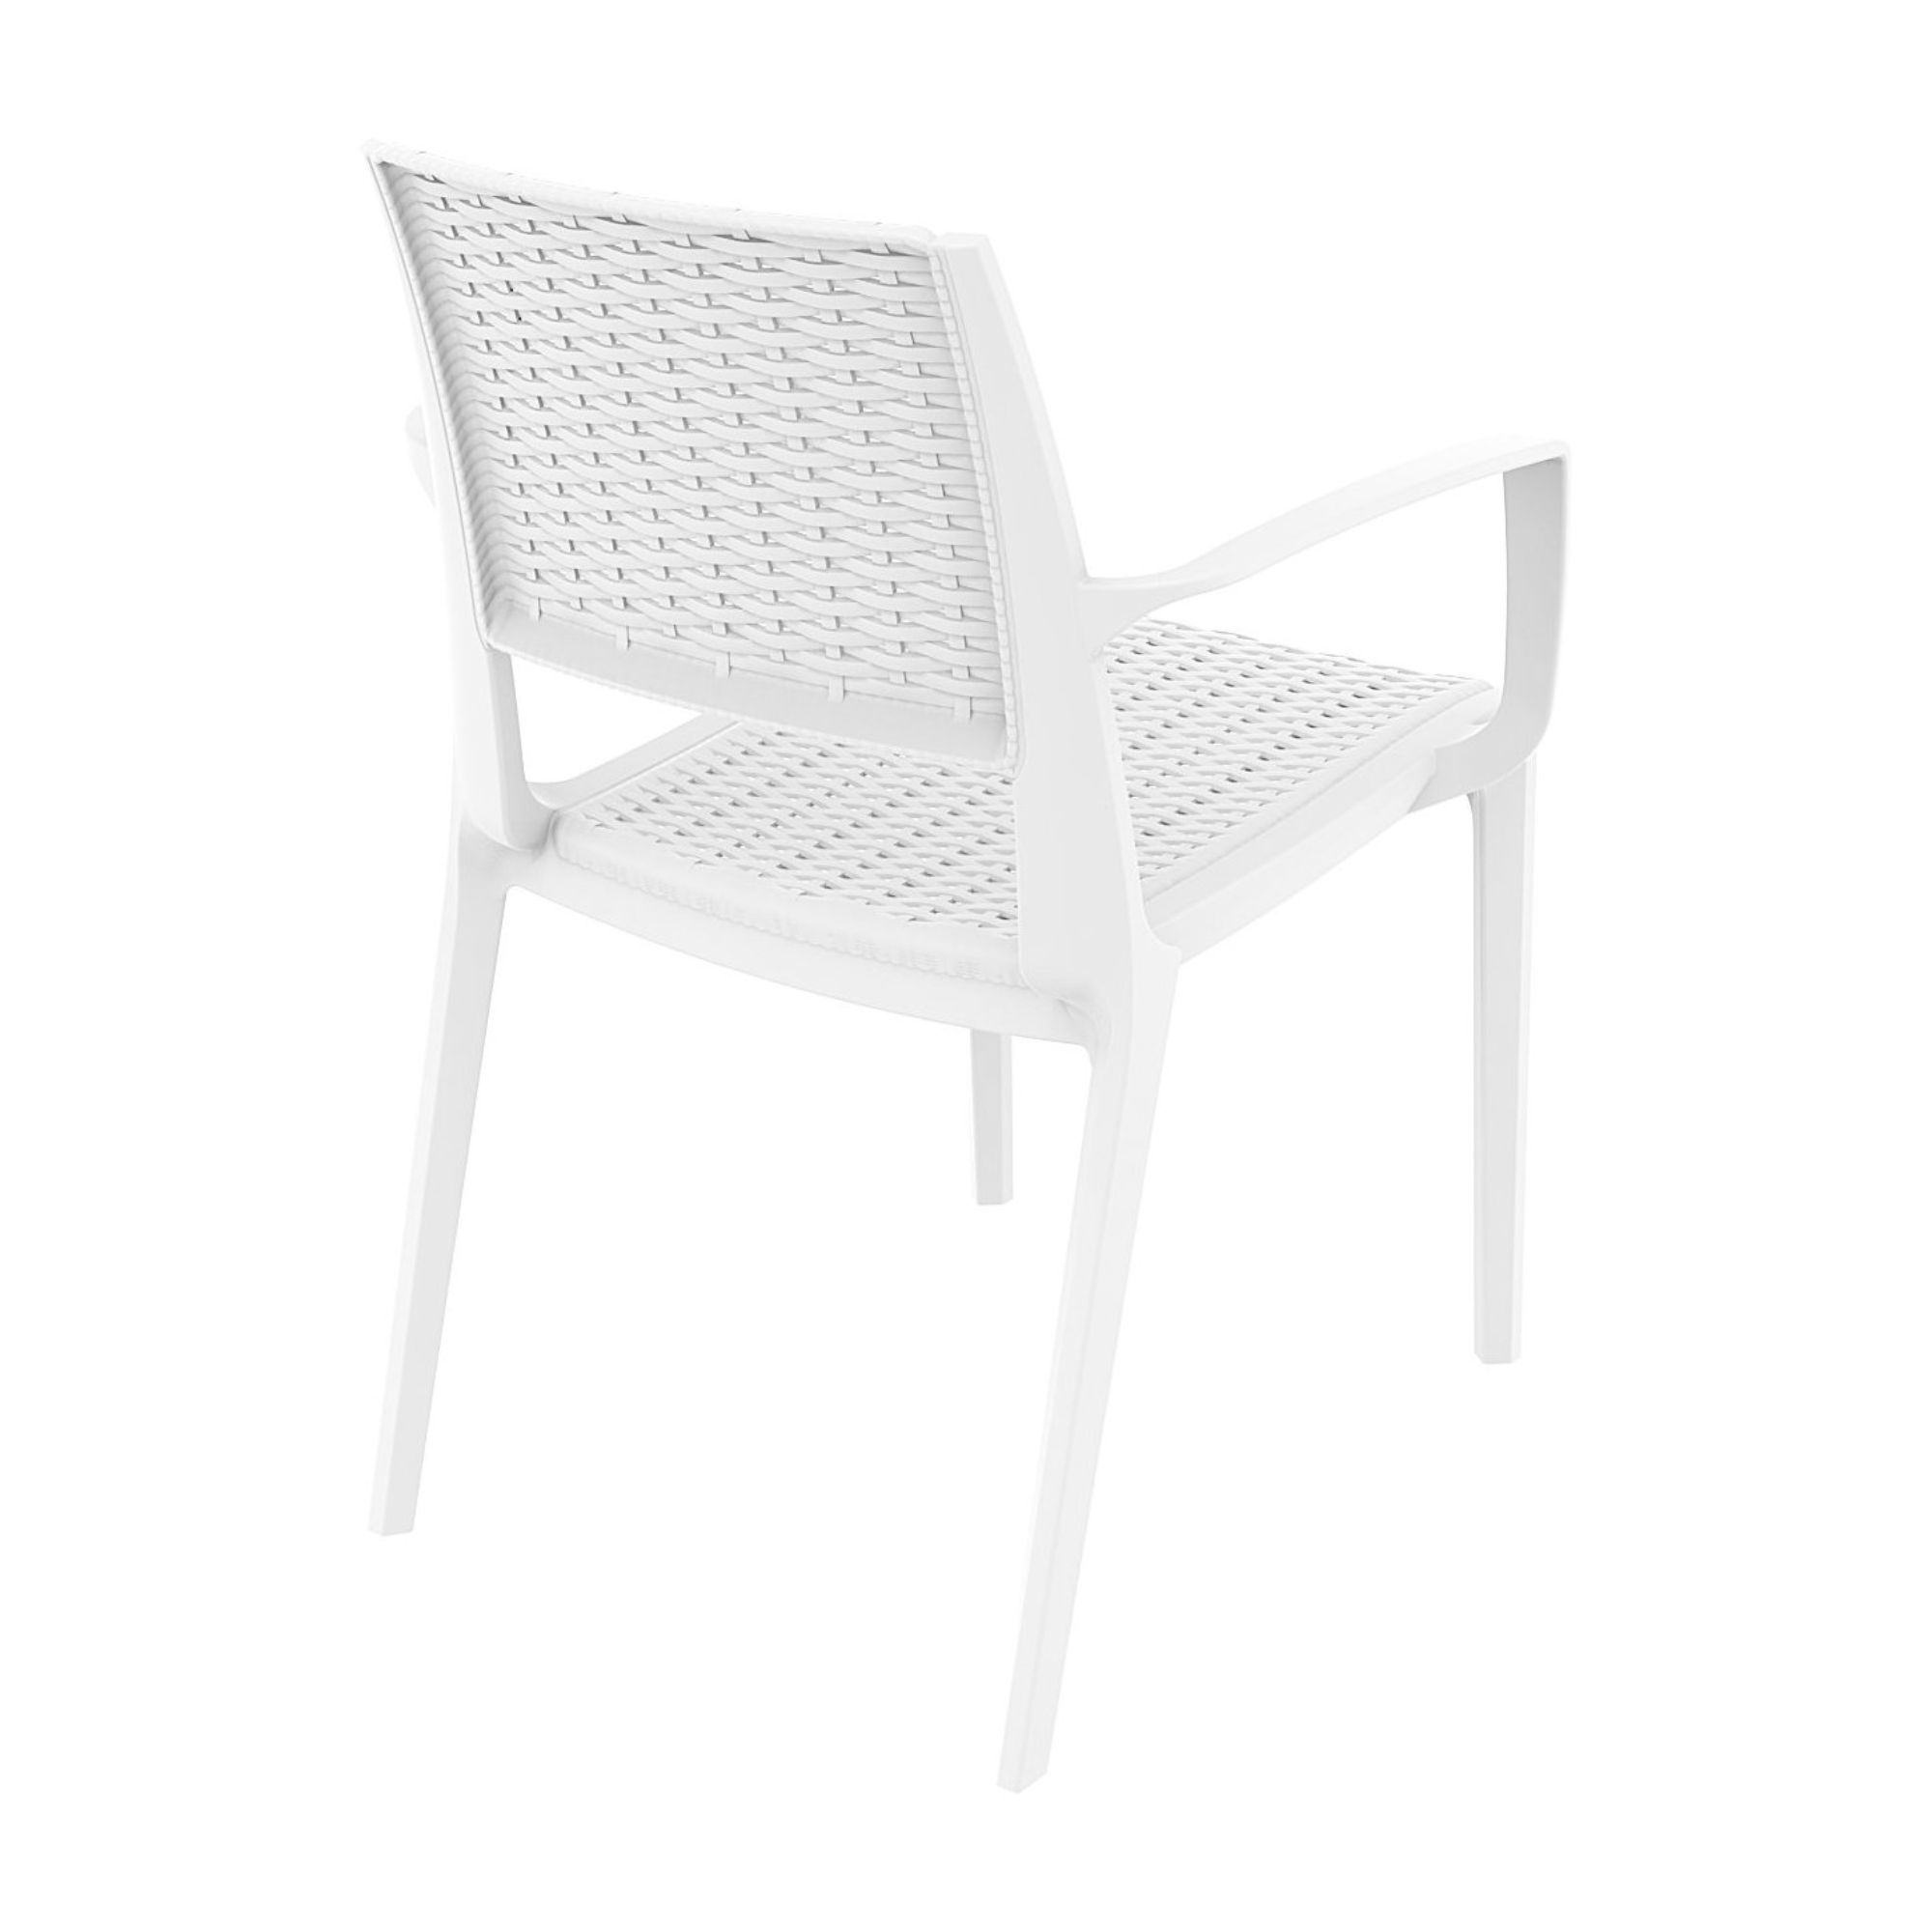 Luxury Commercial Living 32" White Outdoor Patio Wickerlook Dining Arm Chair - image 2 of 9